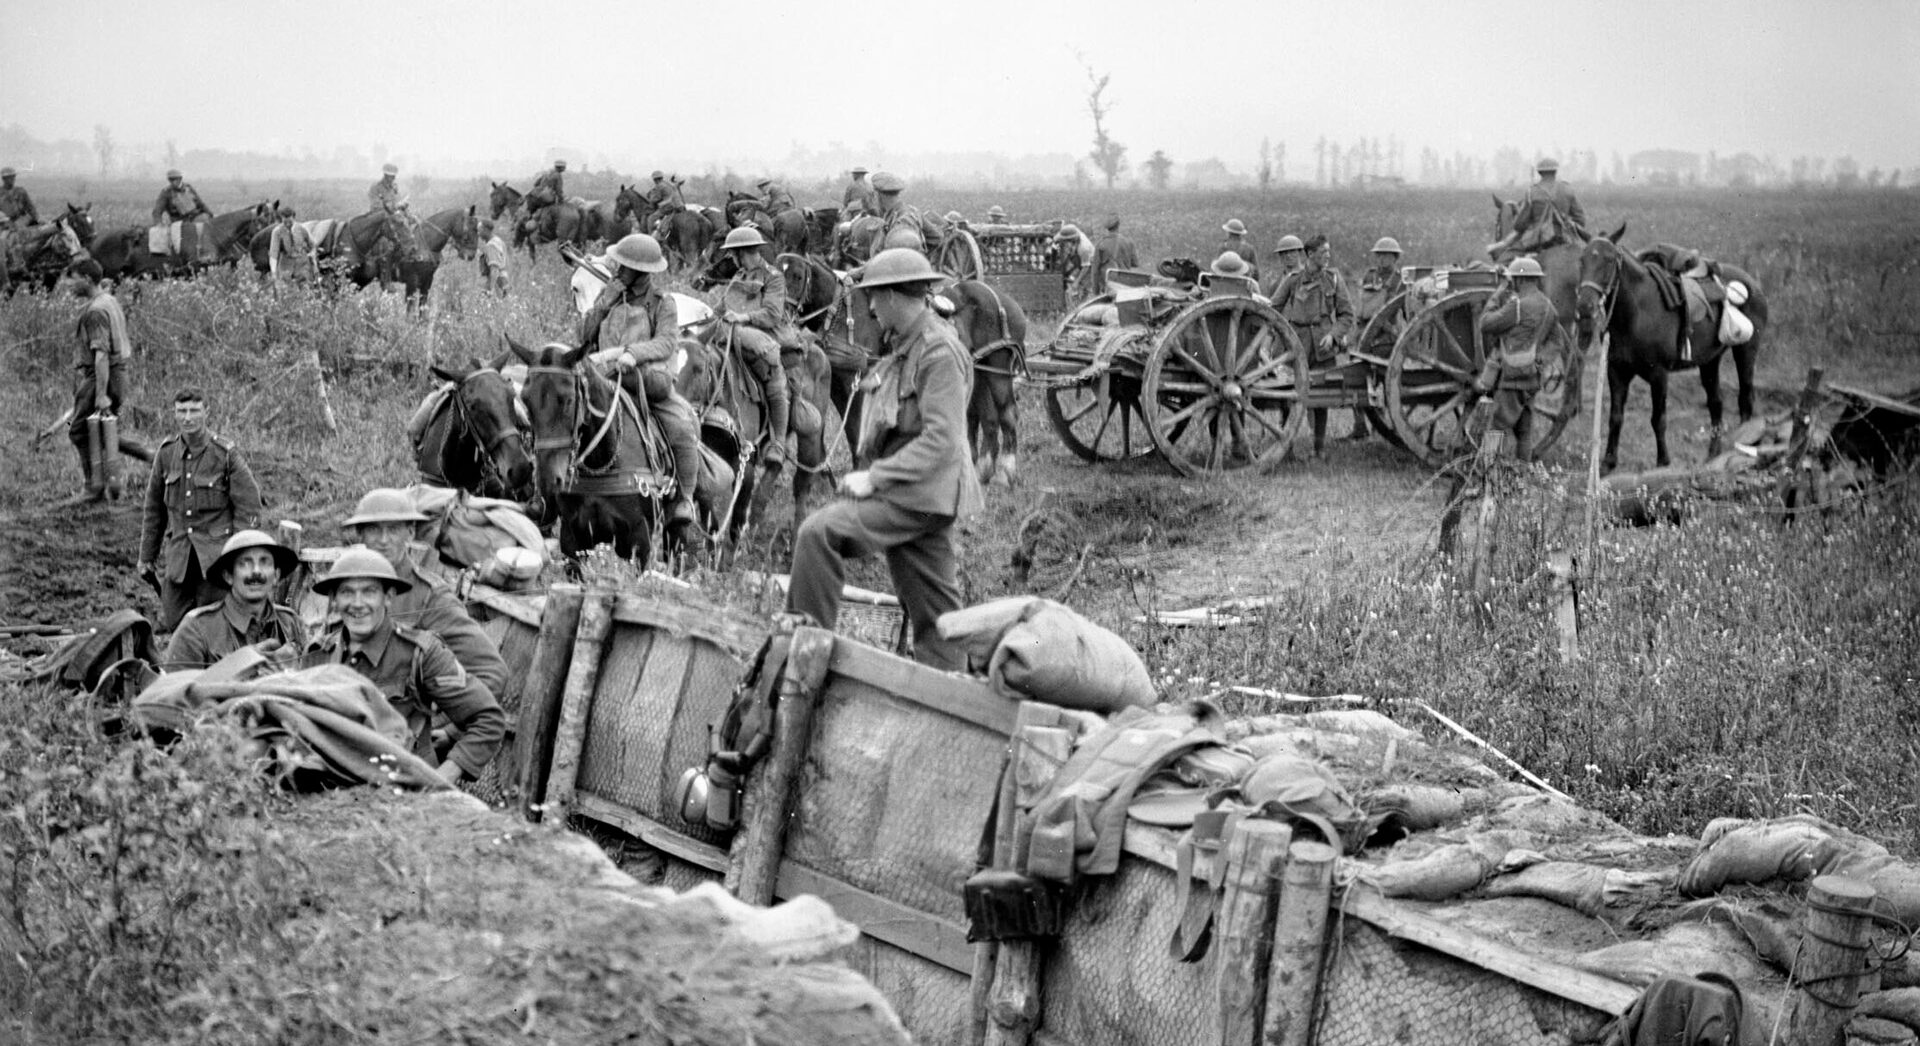 A British 18-pounder battery goes into action on July 31, the first day of the British attack. The Fifth Army began the attack with nine divisions attacking northeast of Ypres. 